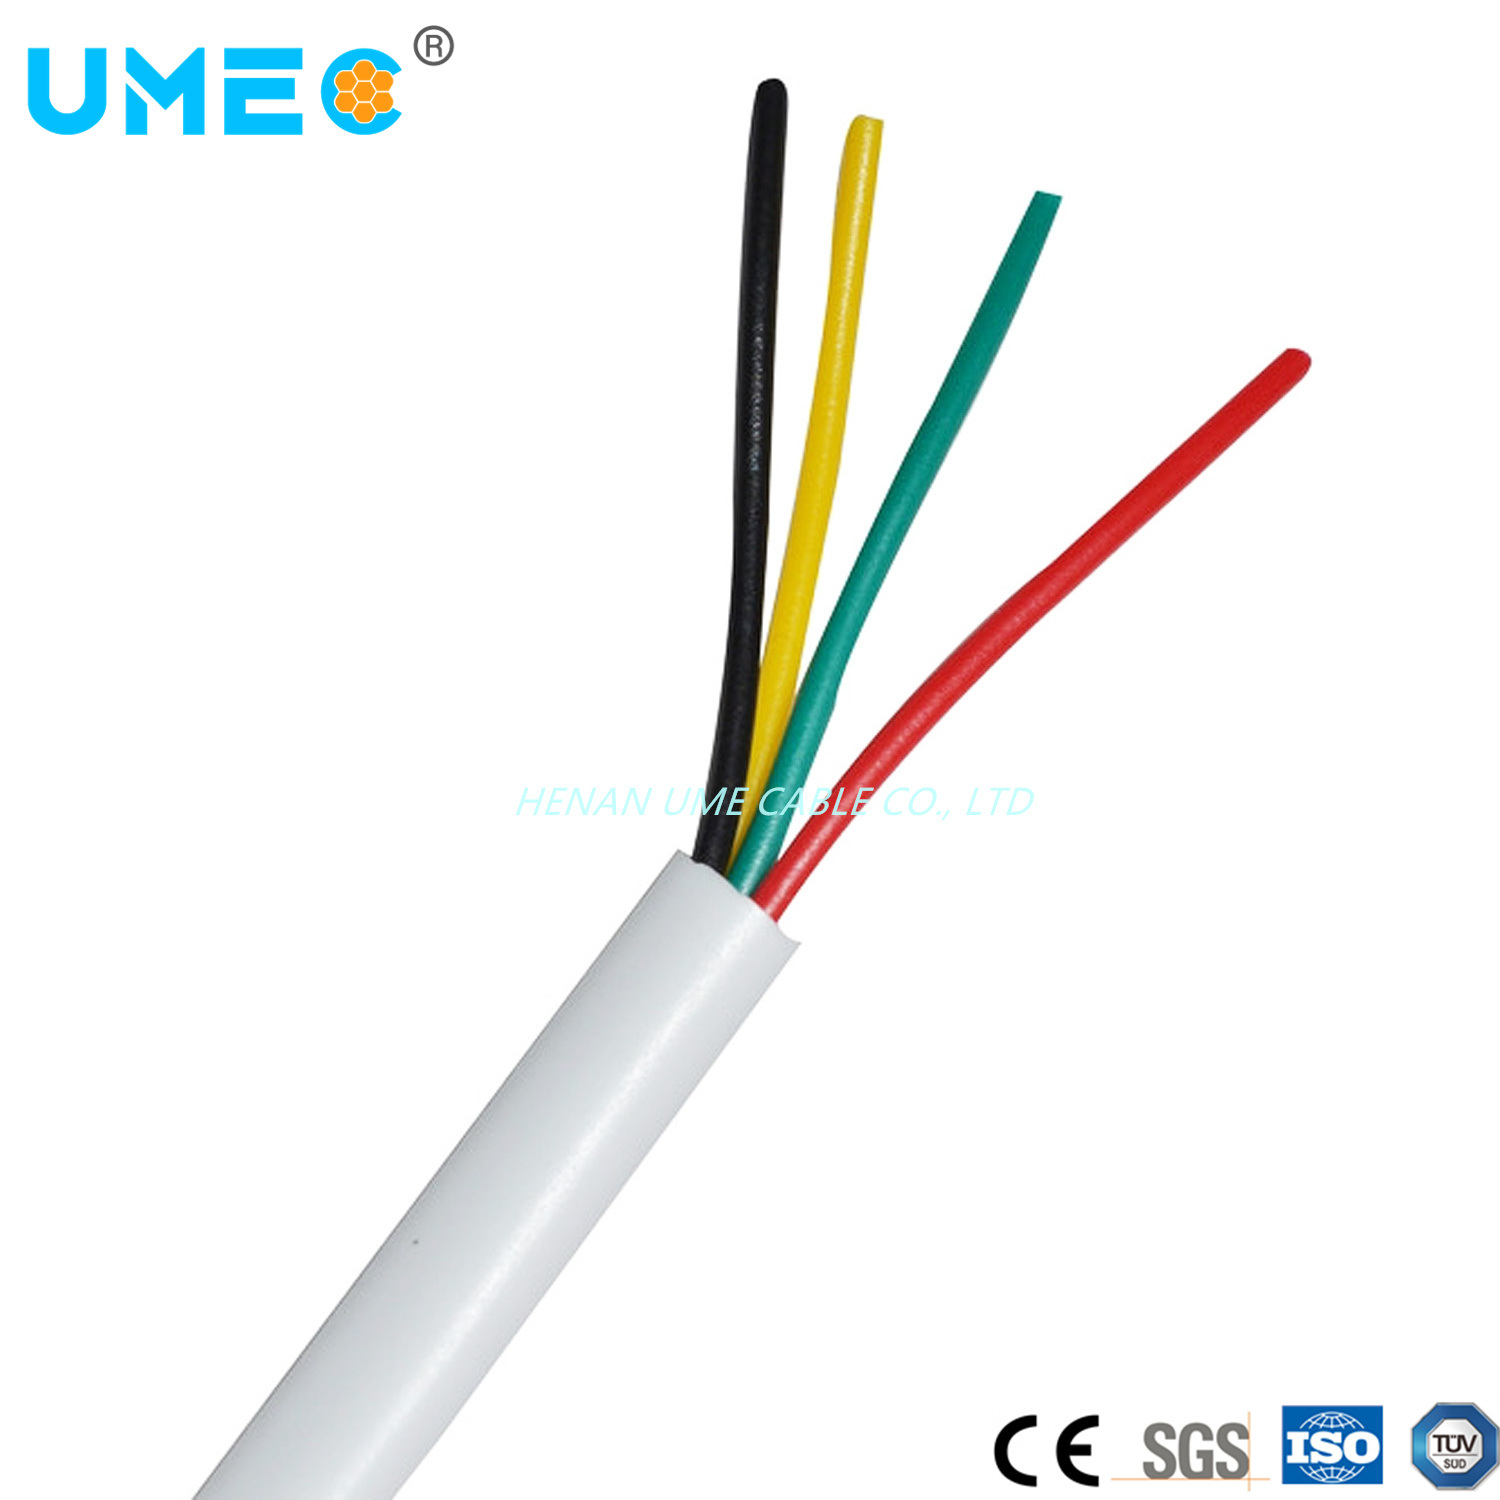 High Quality Cu Conductor PVC Insulated Sheathed Flexcible Wire Rvv